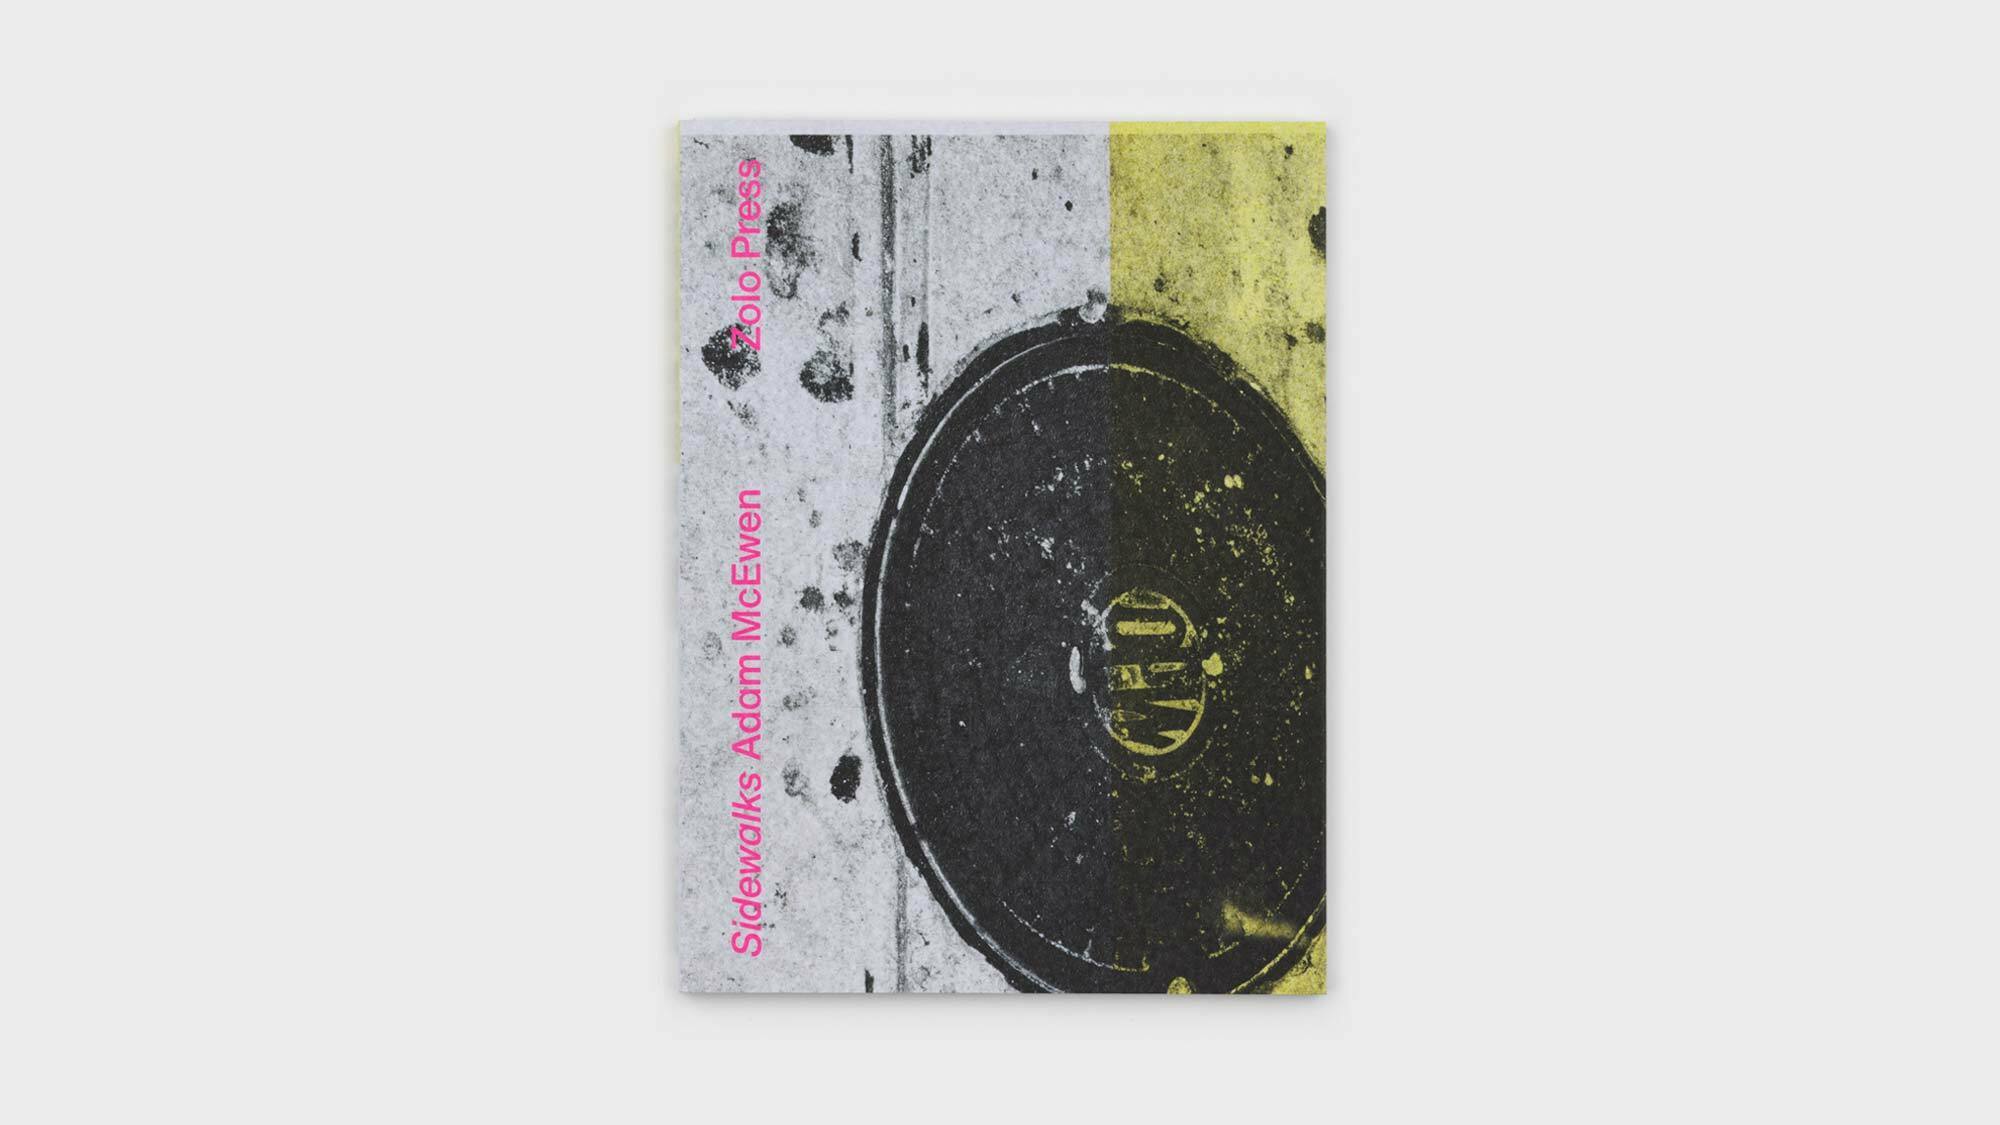 A photograph of the front cover of Sidewalks on a light grey background. The title, Sidewalks,author, Adam McEwen, and Publisher, Zolo Press, are printed in light pink geometric sans-serif type atop a black-and-white image of pavent with a manhole cover and scattered flecks of spit-out gum.